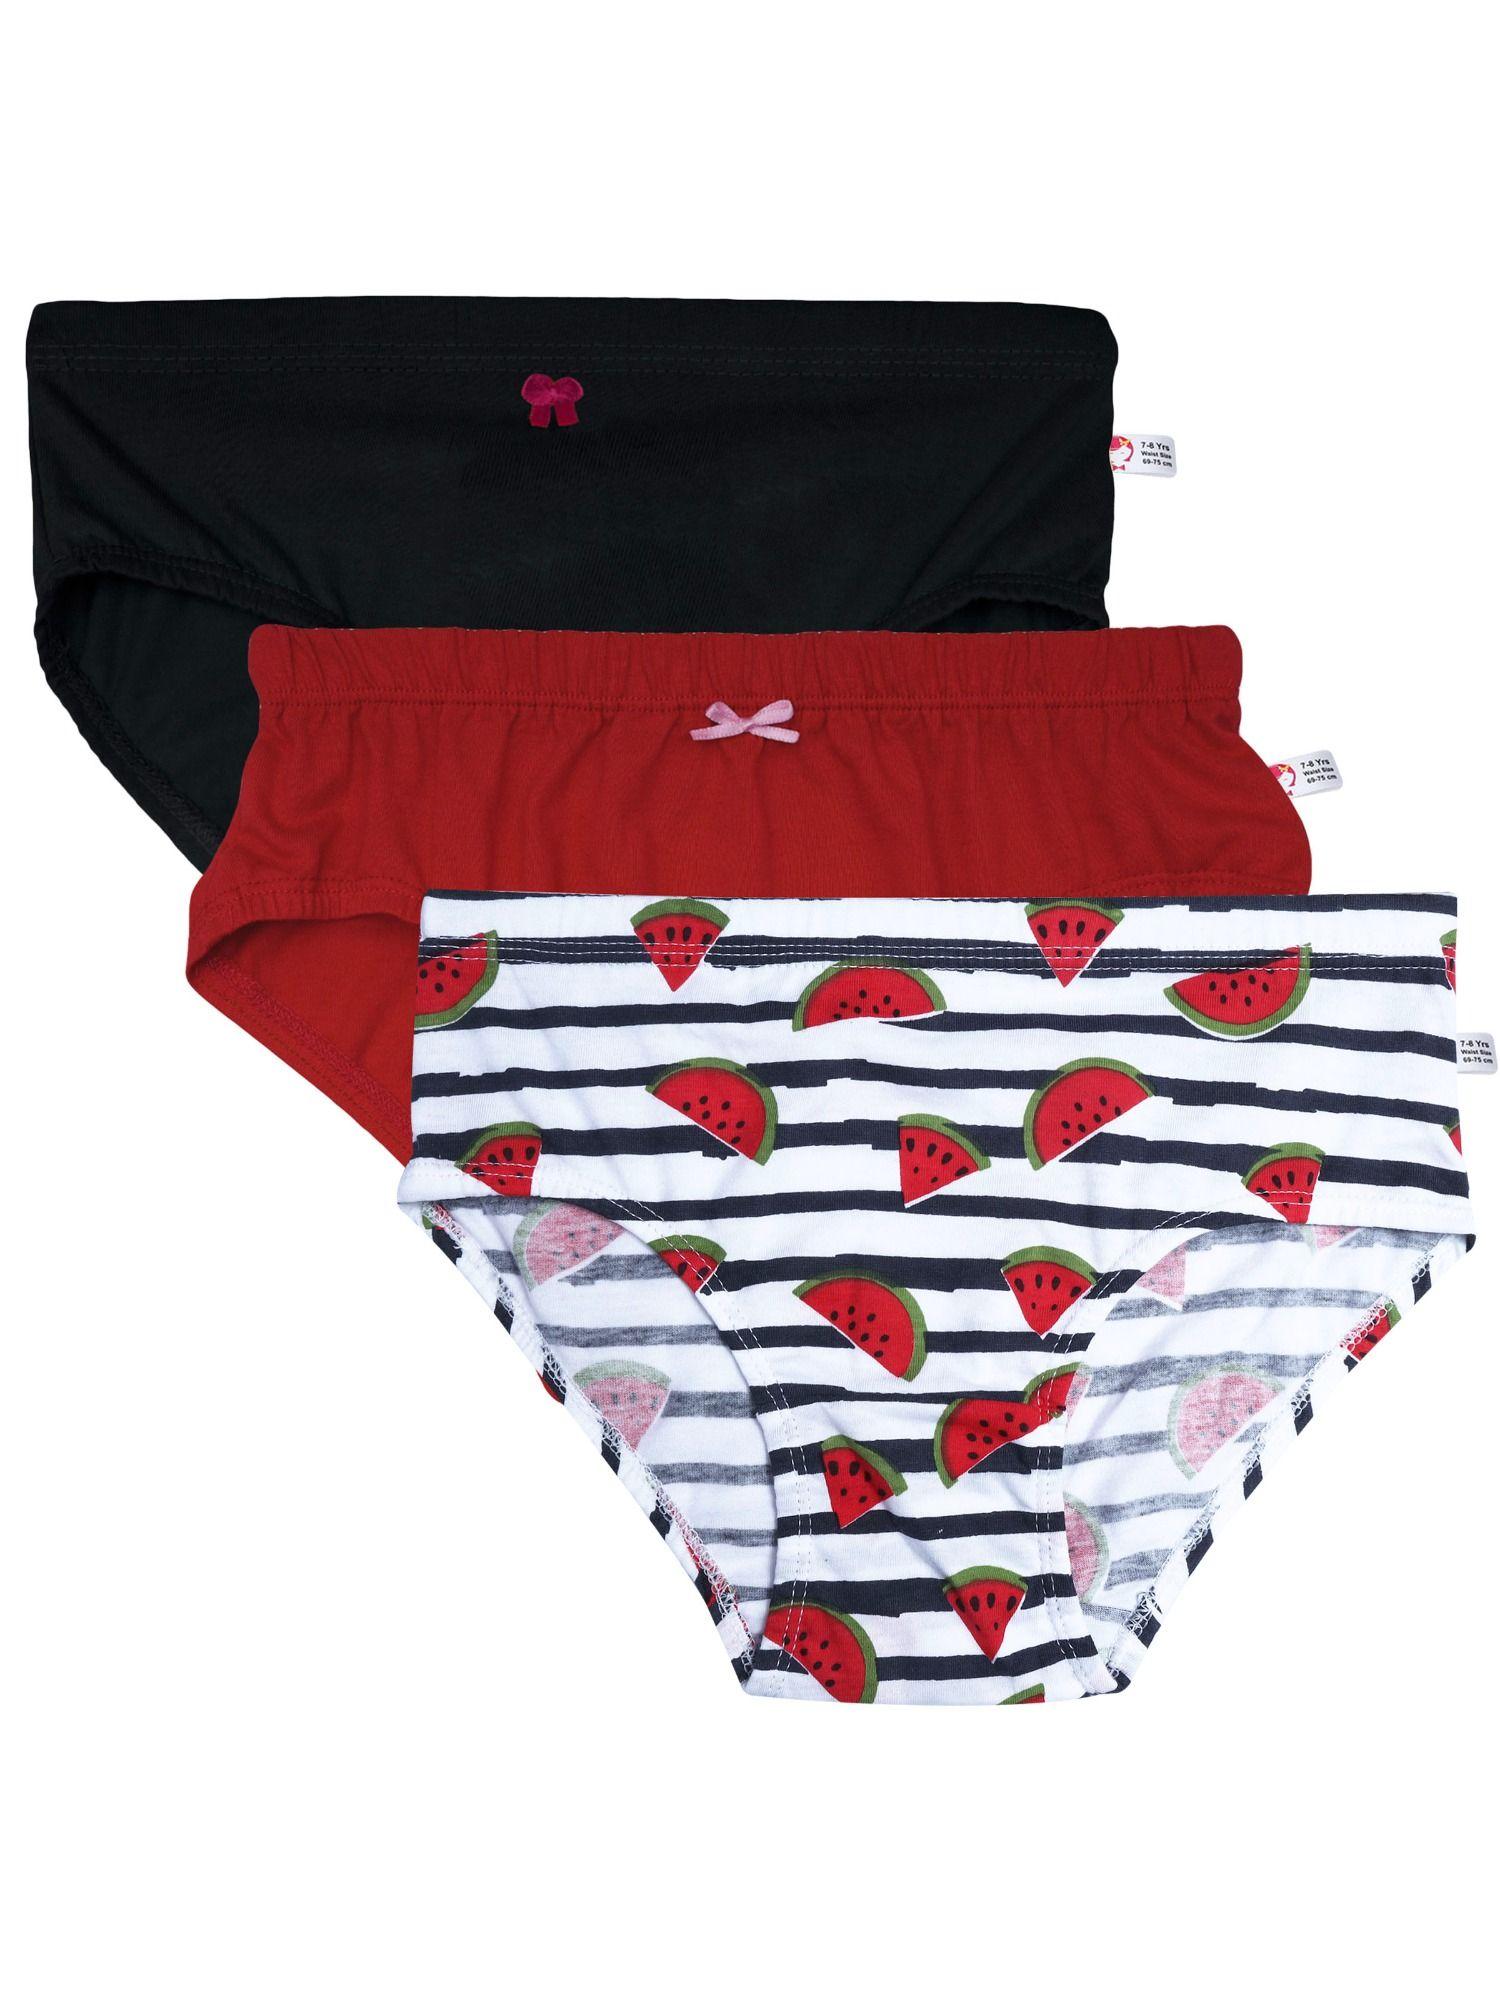 panties-for-girls-1-watermelon-red-print-and-2-solids-(pack-of-3)